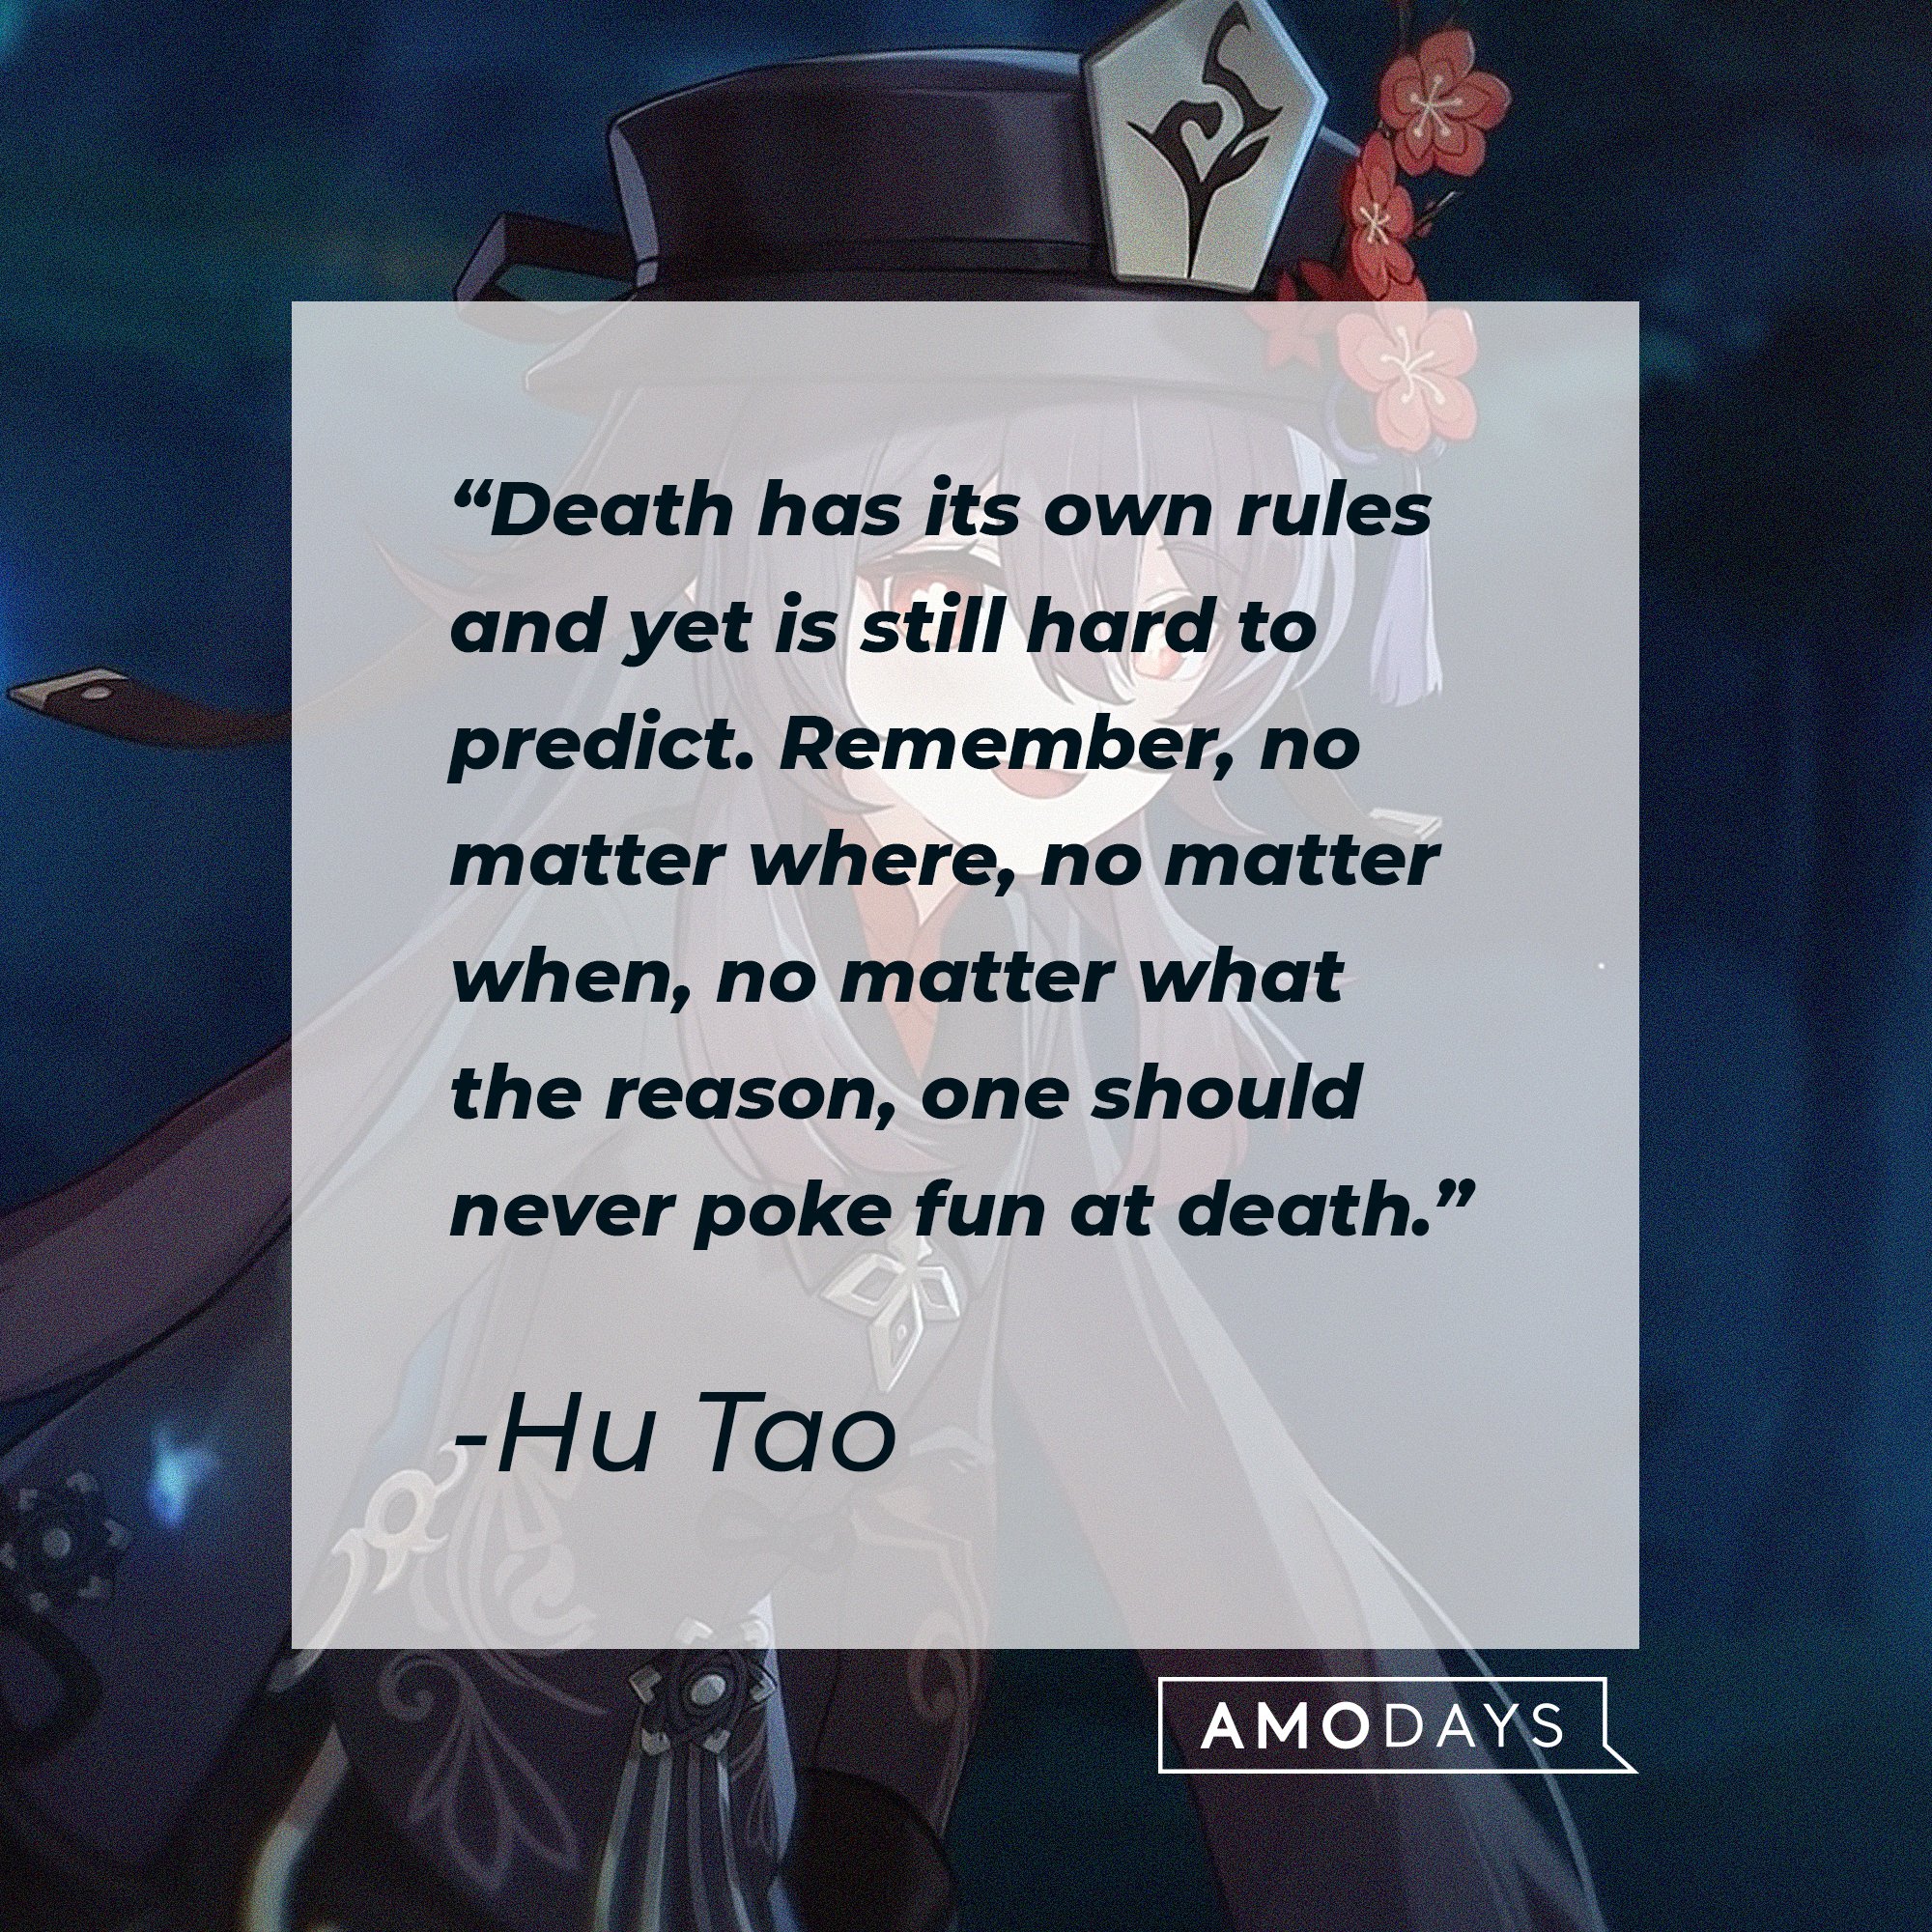  Hu Tao’s quote: "Death has its own rules and yet is still hard to predict. Remember, no matter where, no matter when, no matter what the reason, one should never poke fun at death." | Image: AmoDays